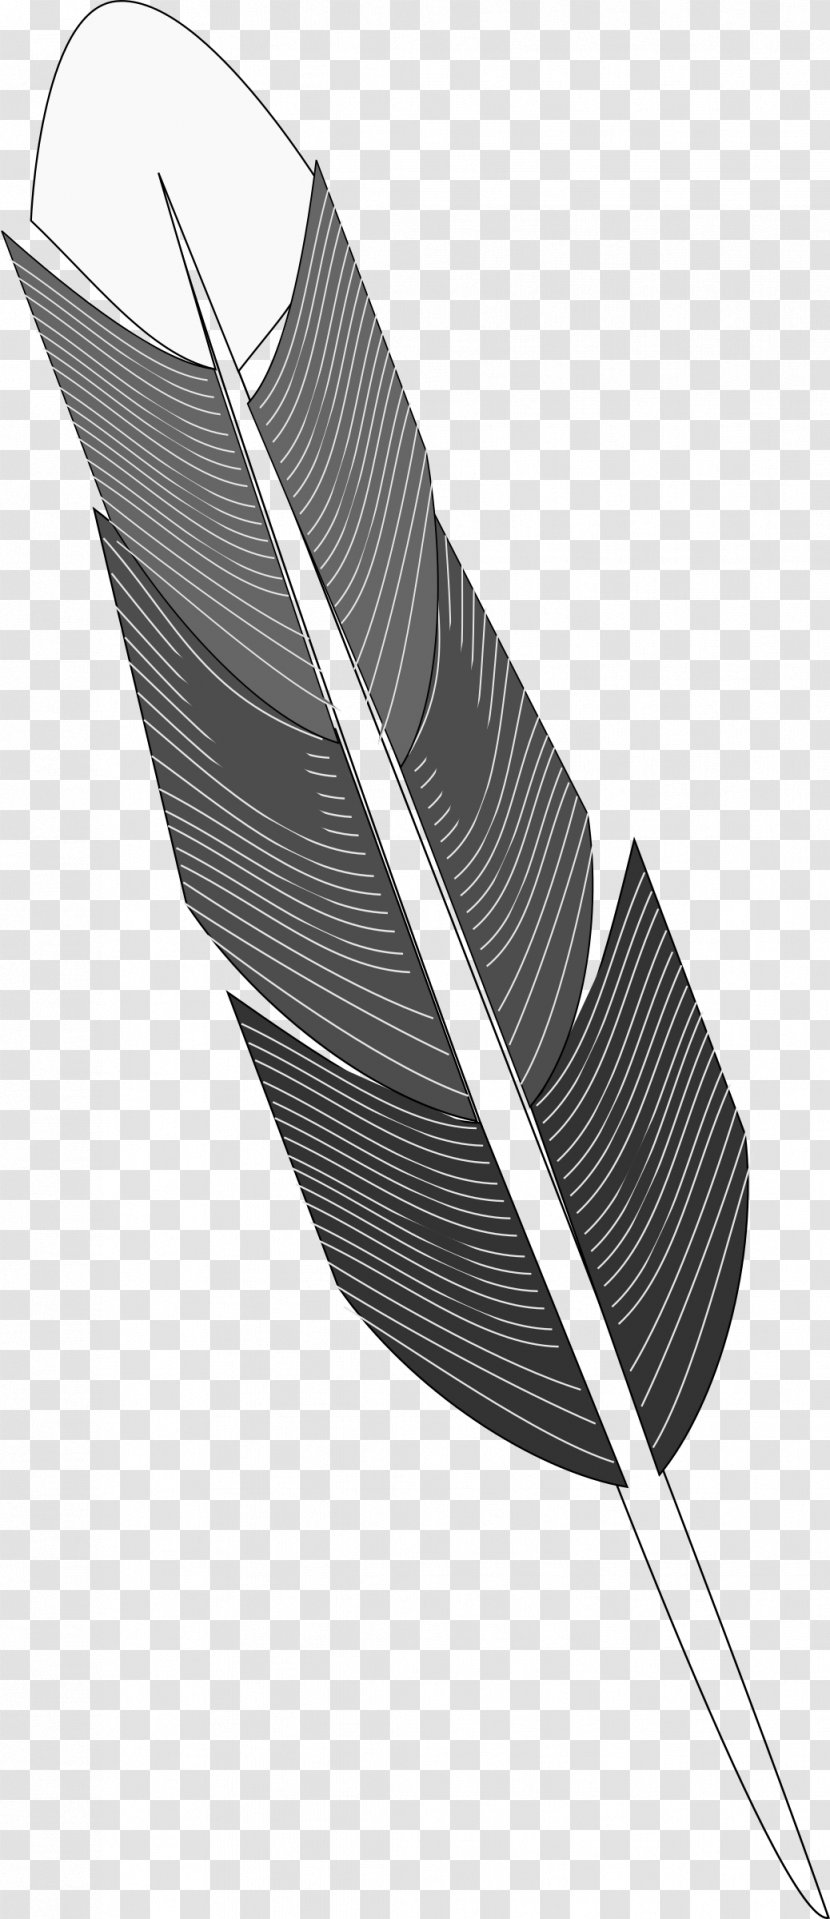 Bird Feather Drawing - Black And White Transparent PNG